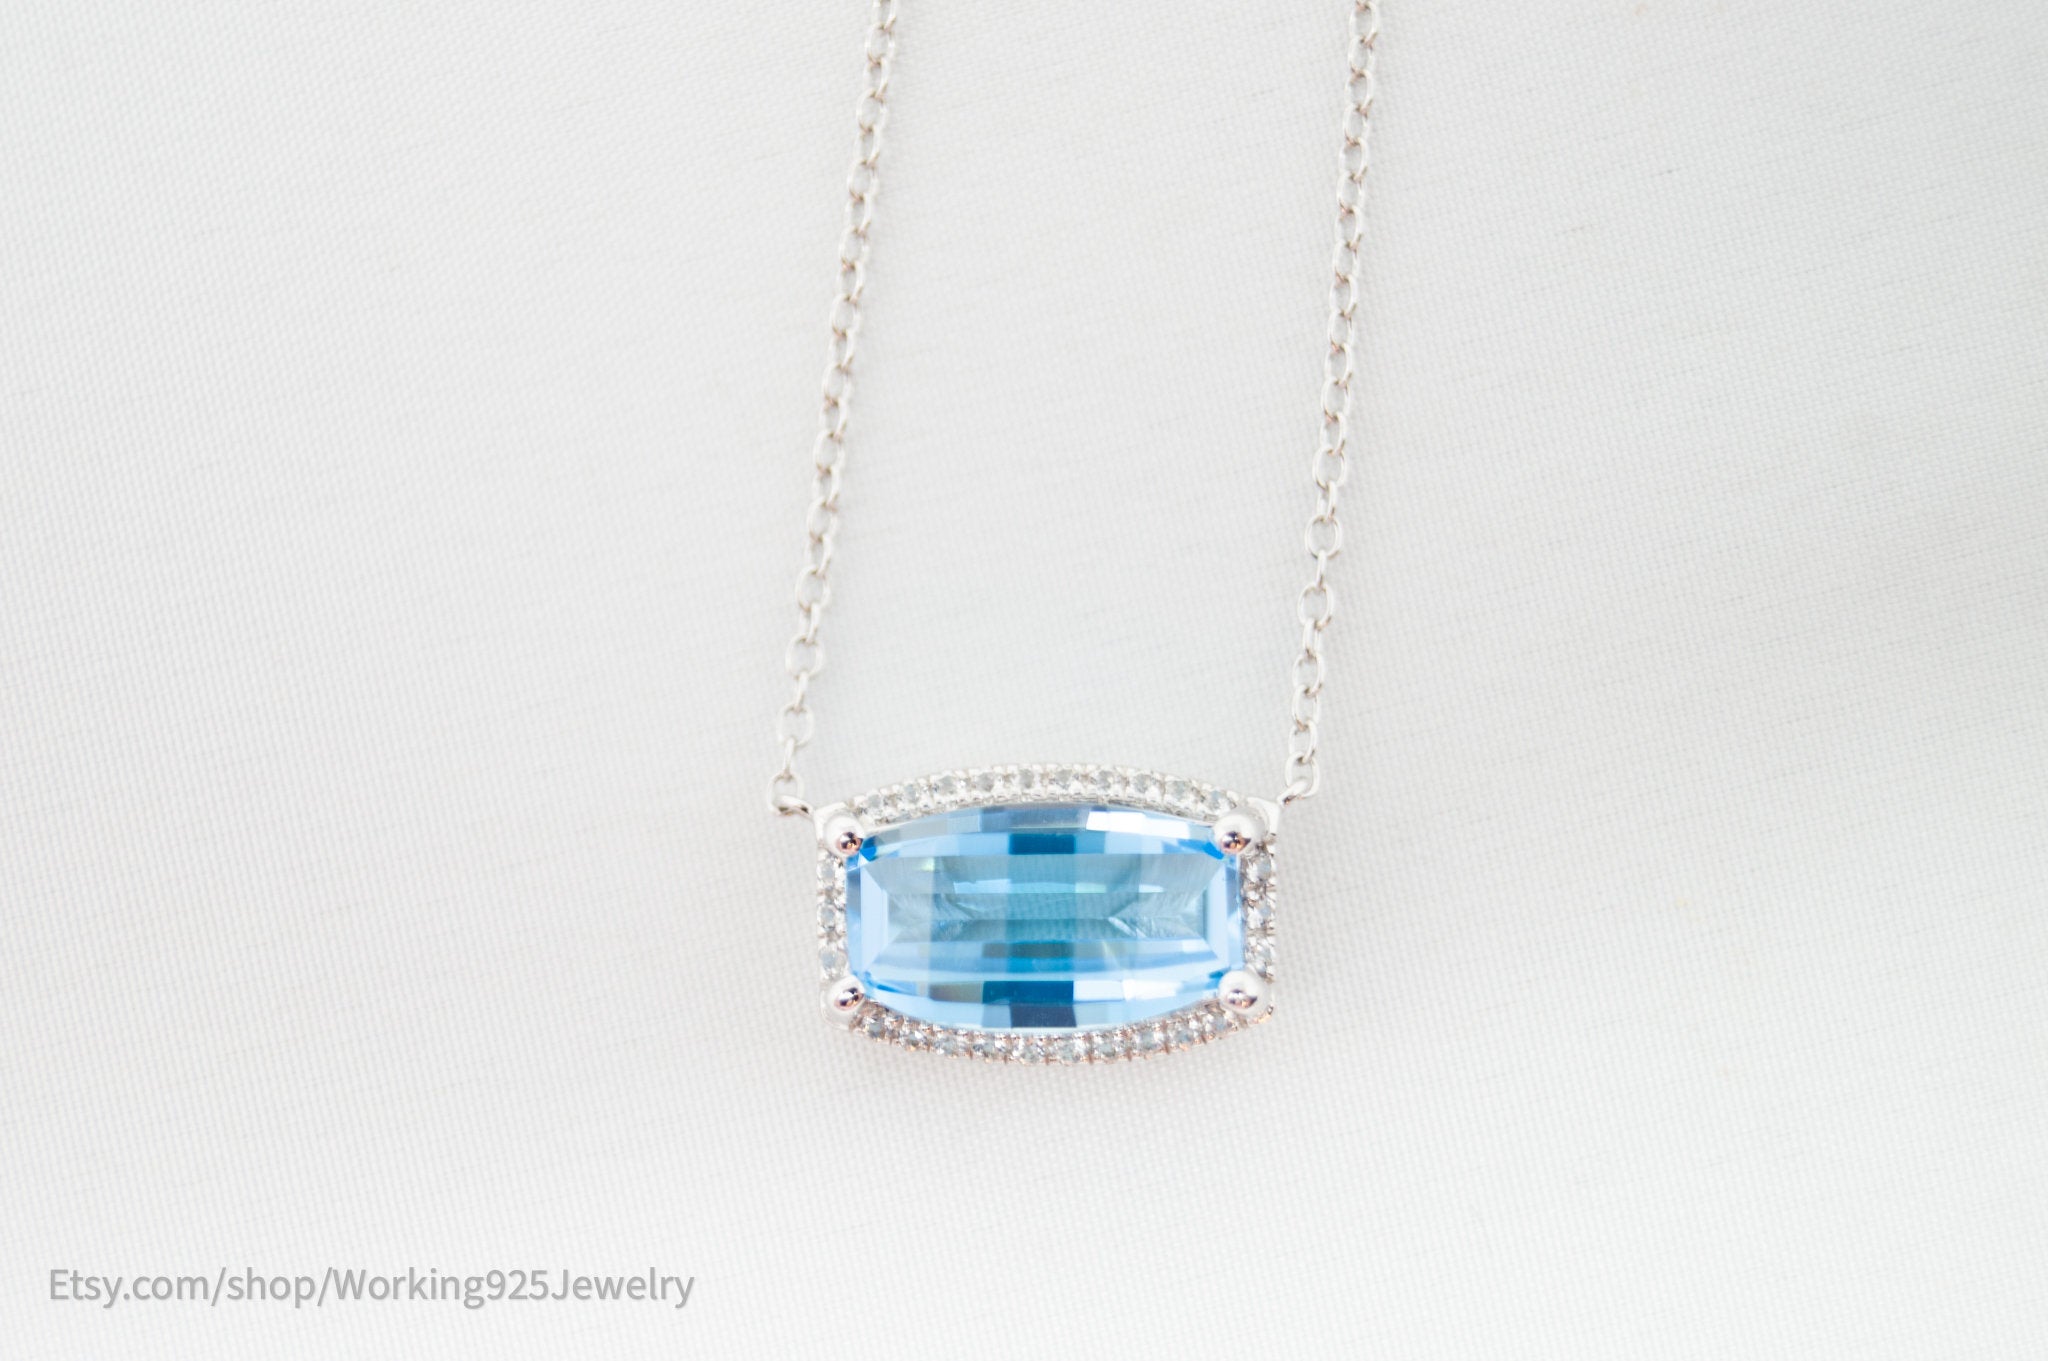 Vintage Art Deco Style Checkerboard Blue Topaz CZ Sterling Silver Necklace